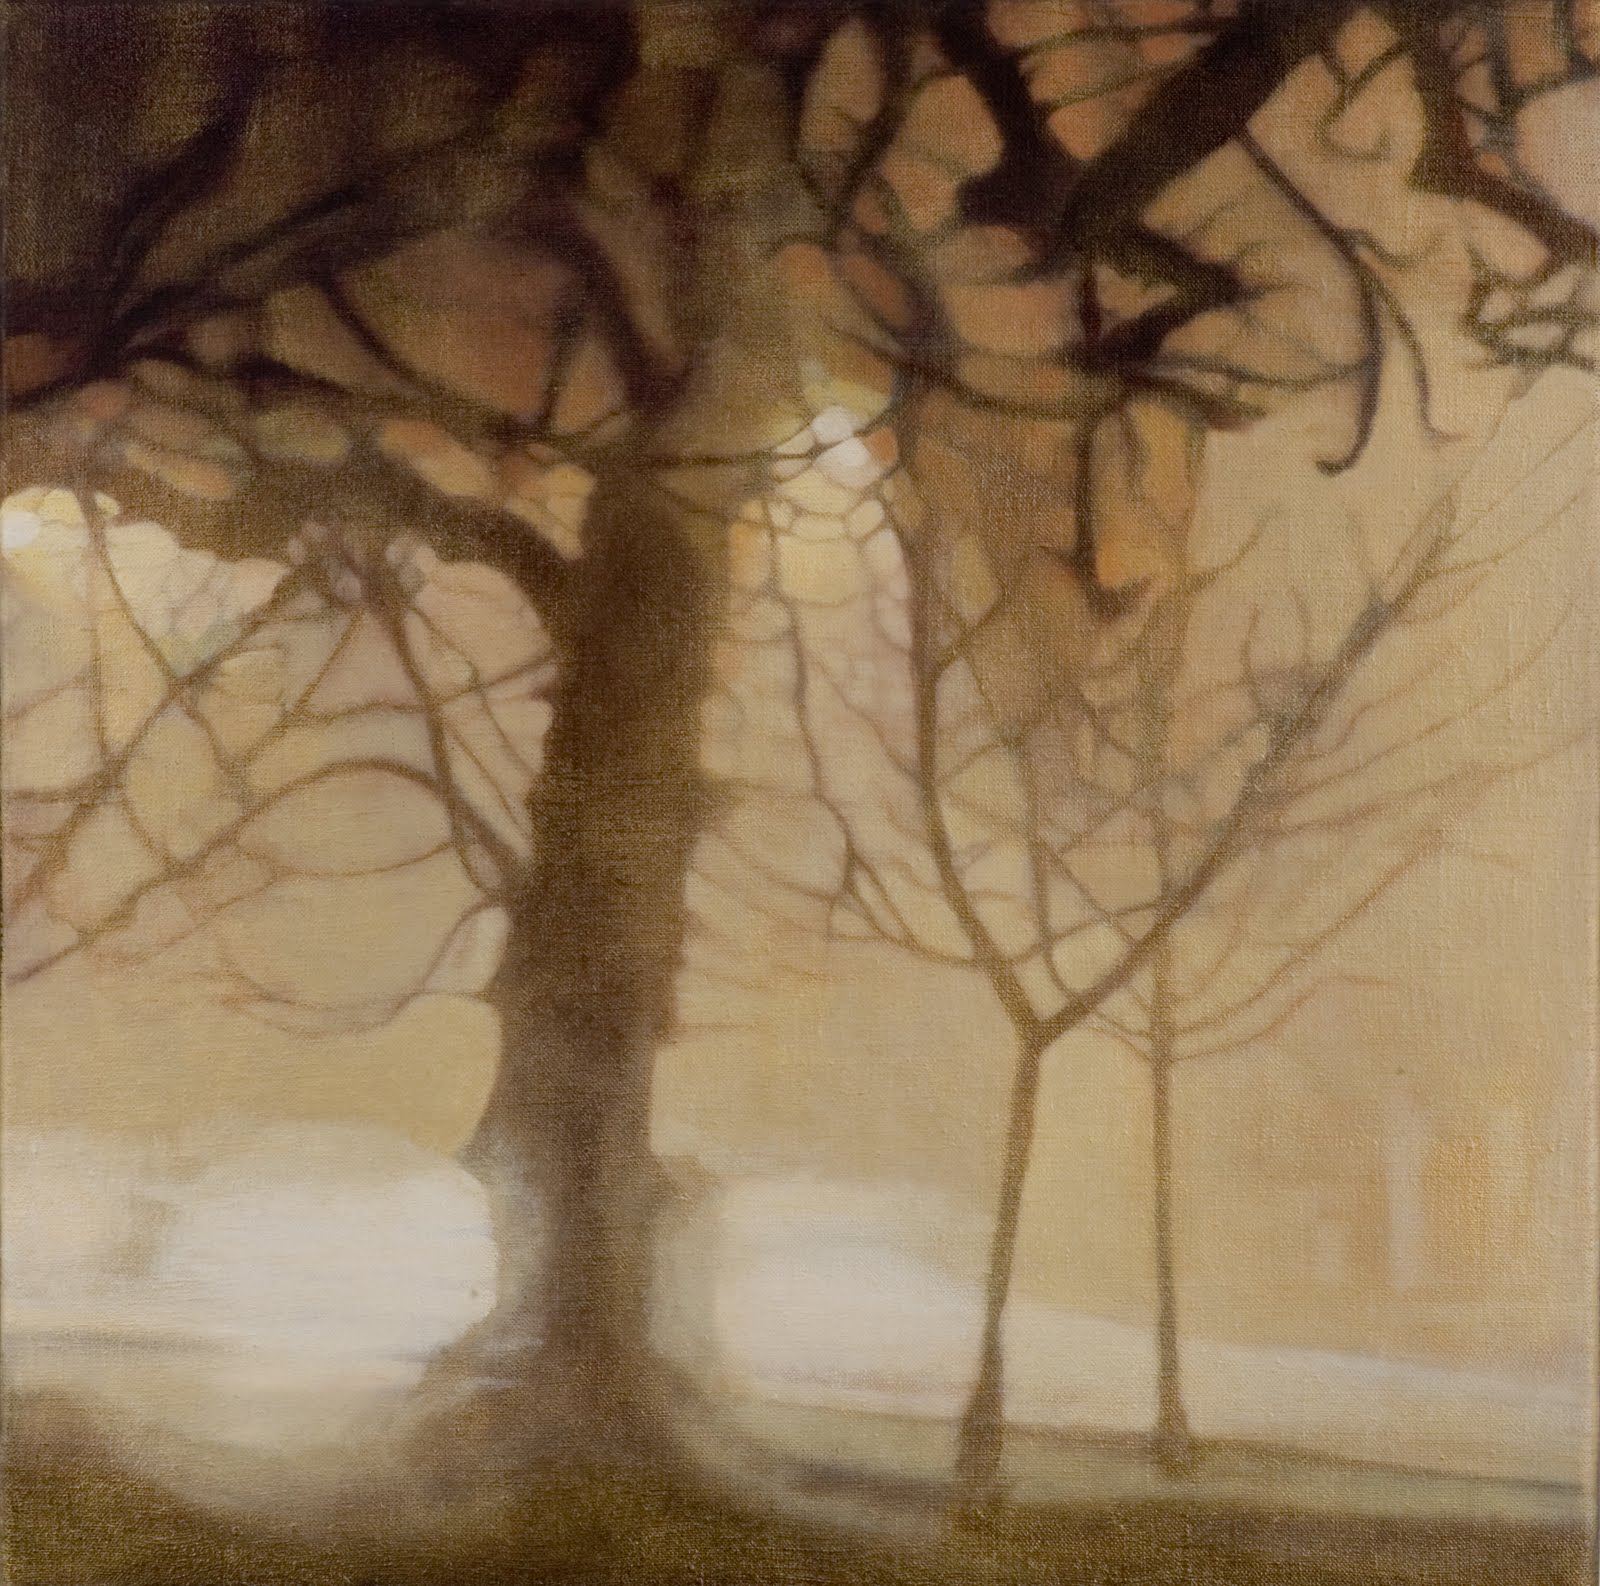 "Clapham Common Tree at Night", oil on linen, 18 x 18 in.